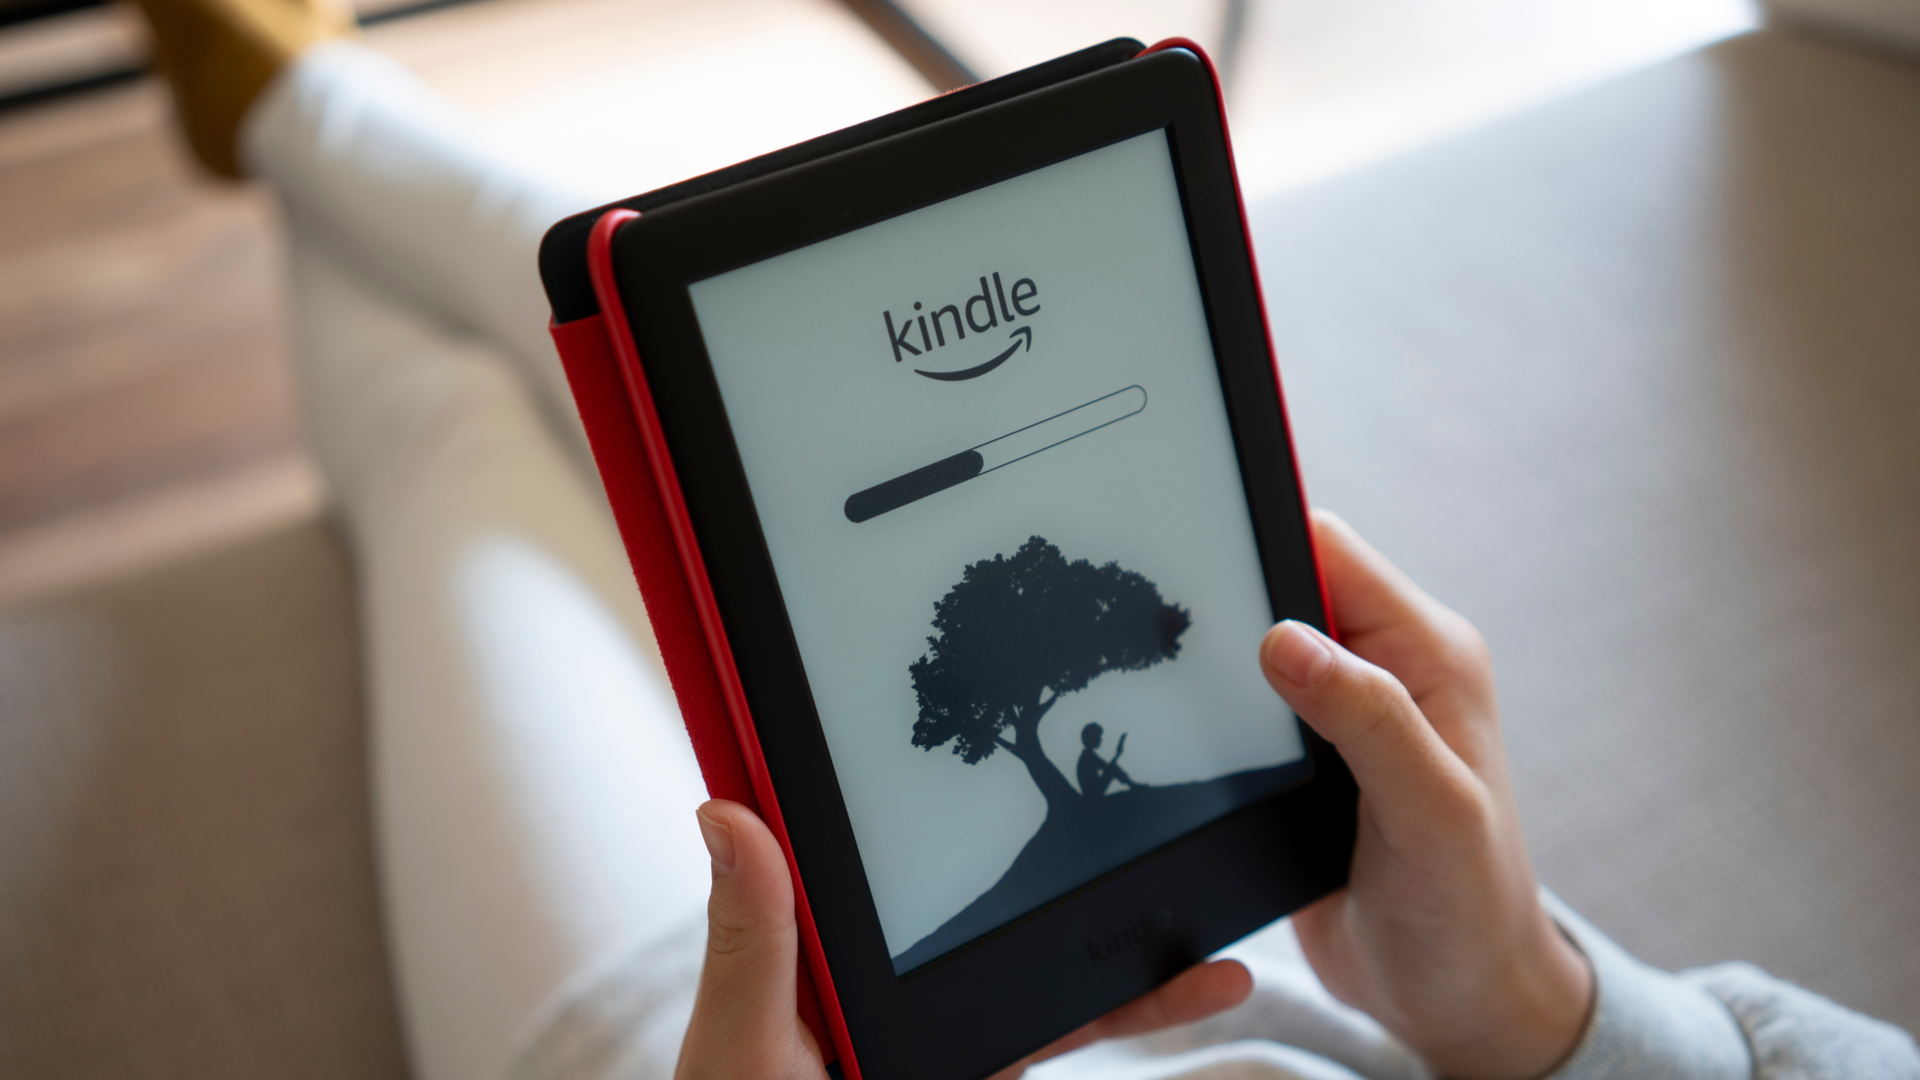 Closeup of the Kindle logo and a progress bar seen on the Amazon Kindle ebook reader.